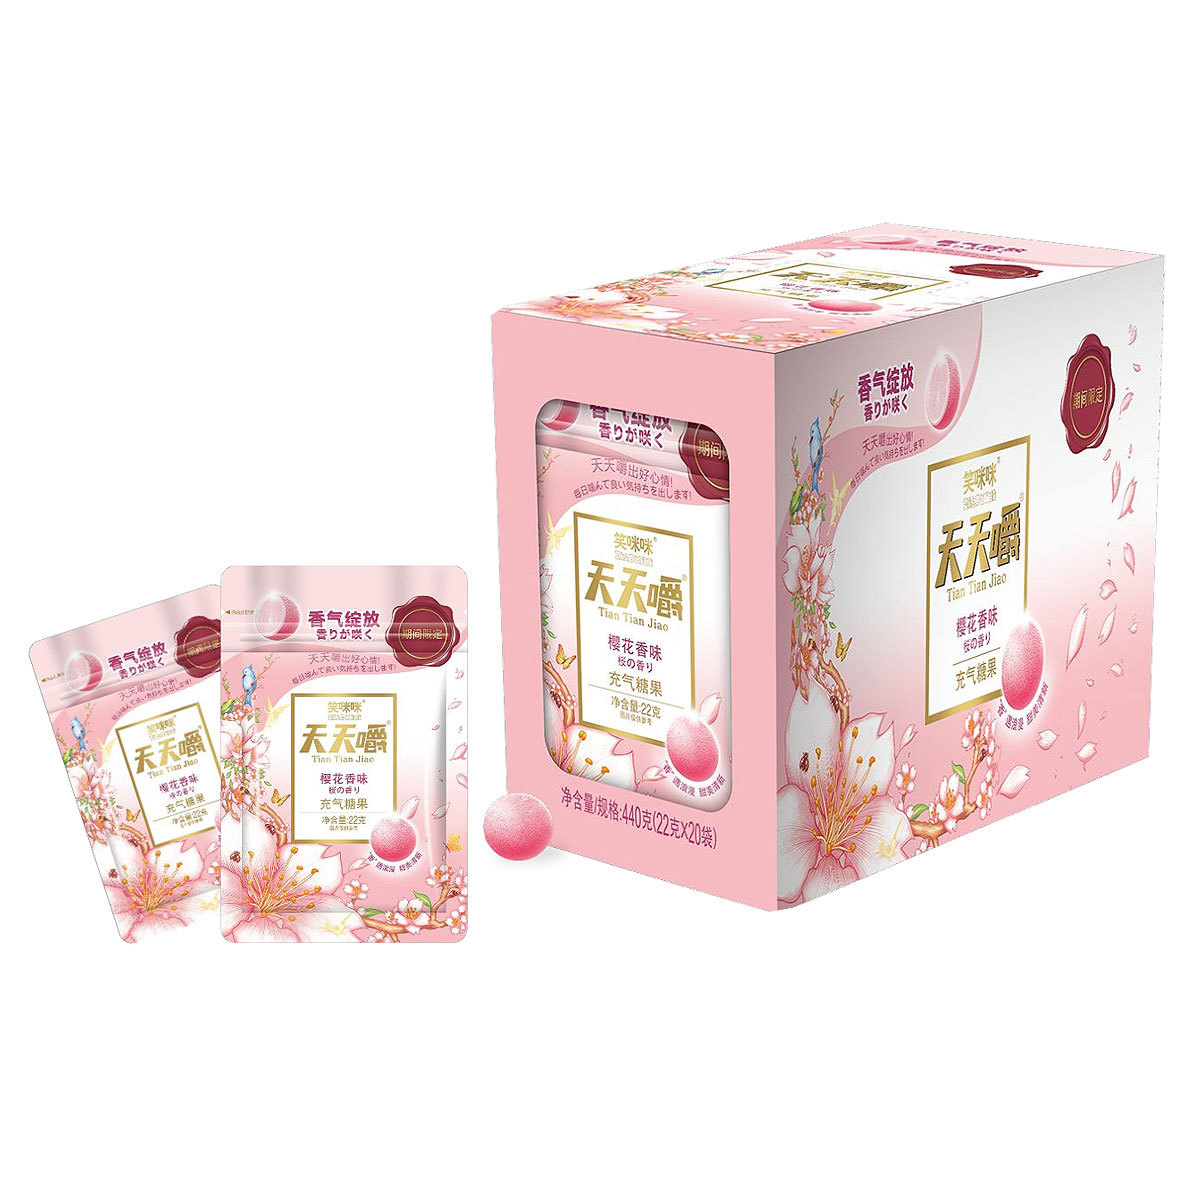 Flower Flavor Juice Inflated Sugar -22g Cherry Blossom Flavor